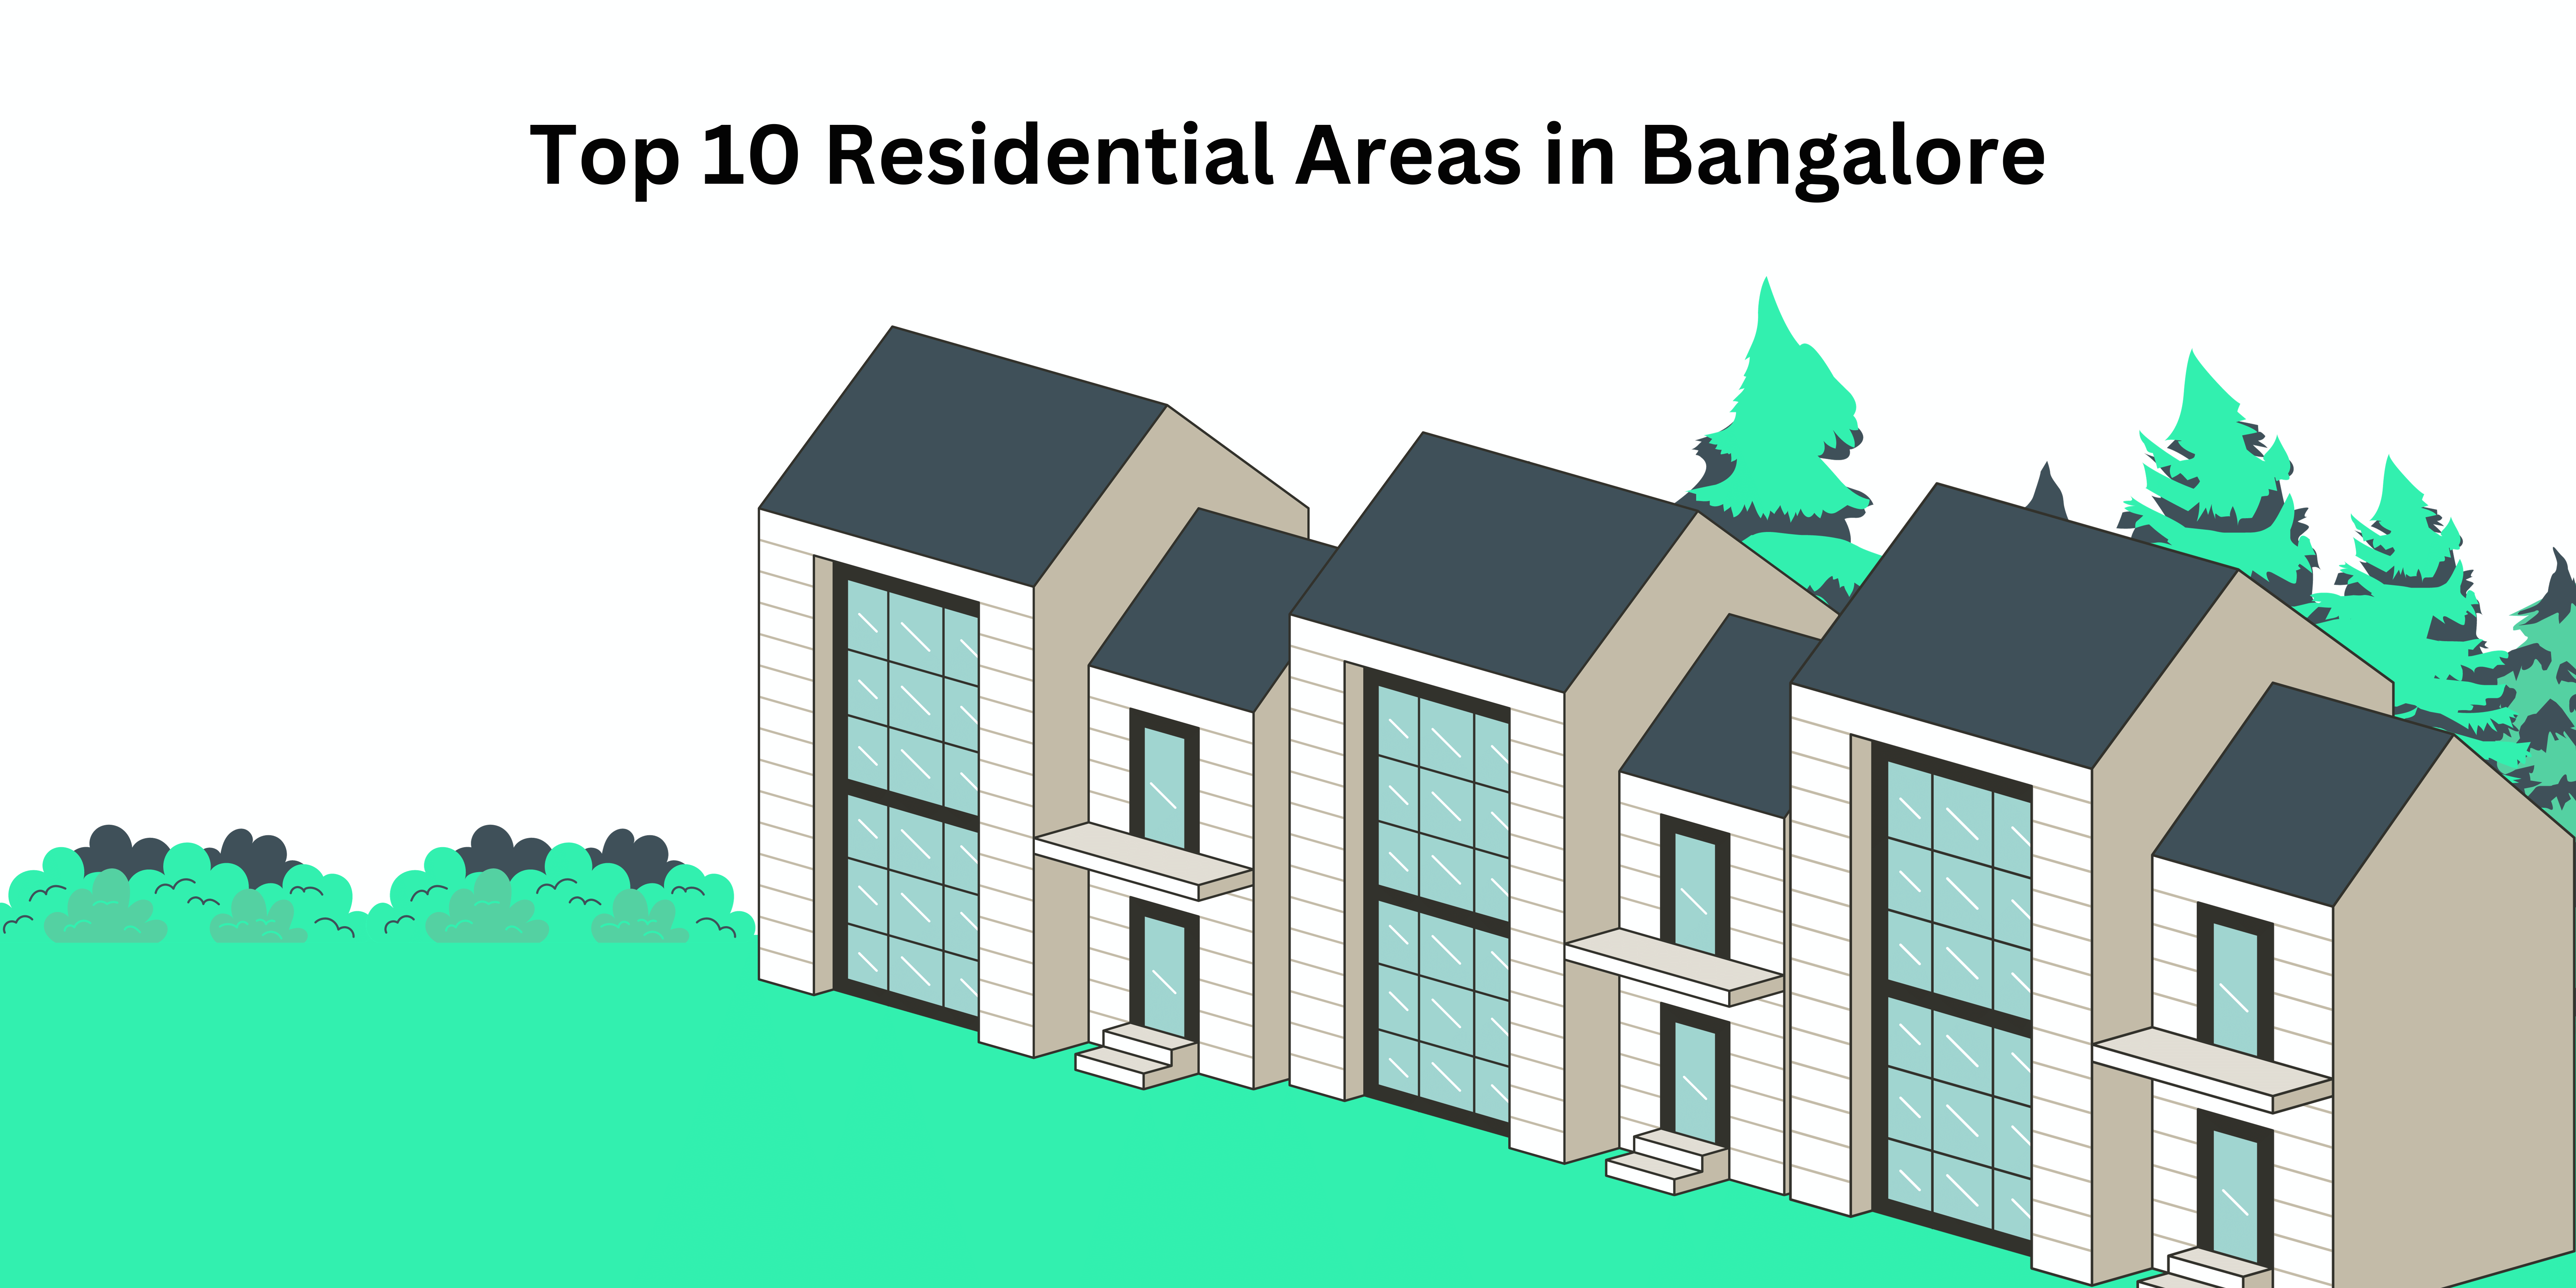 Top 10 Residential Areas in Bangalore